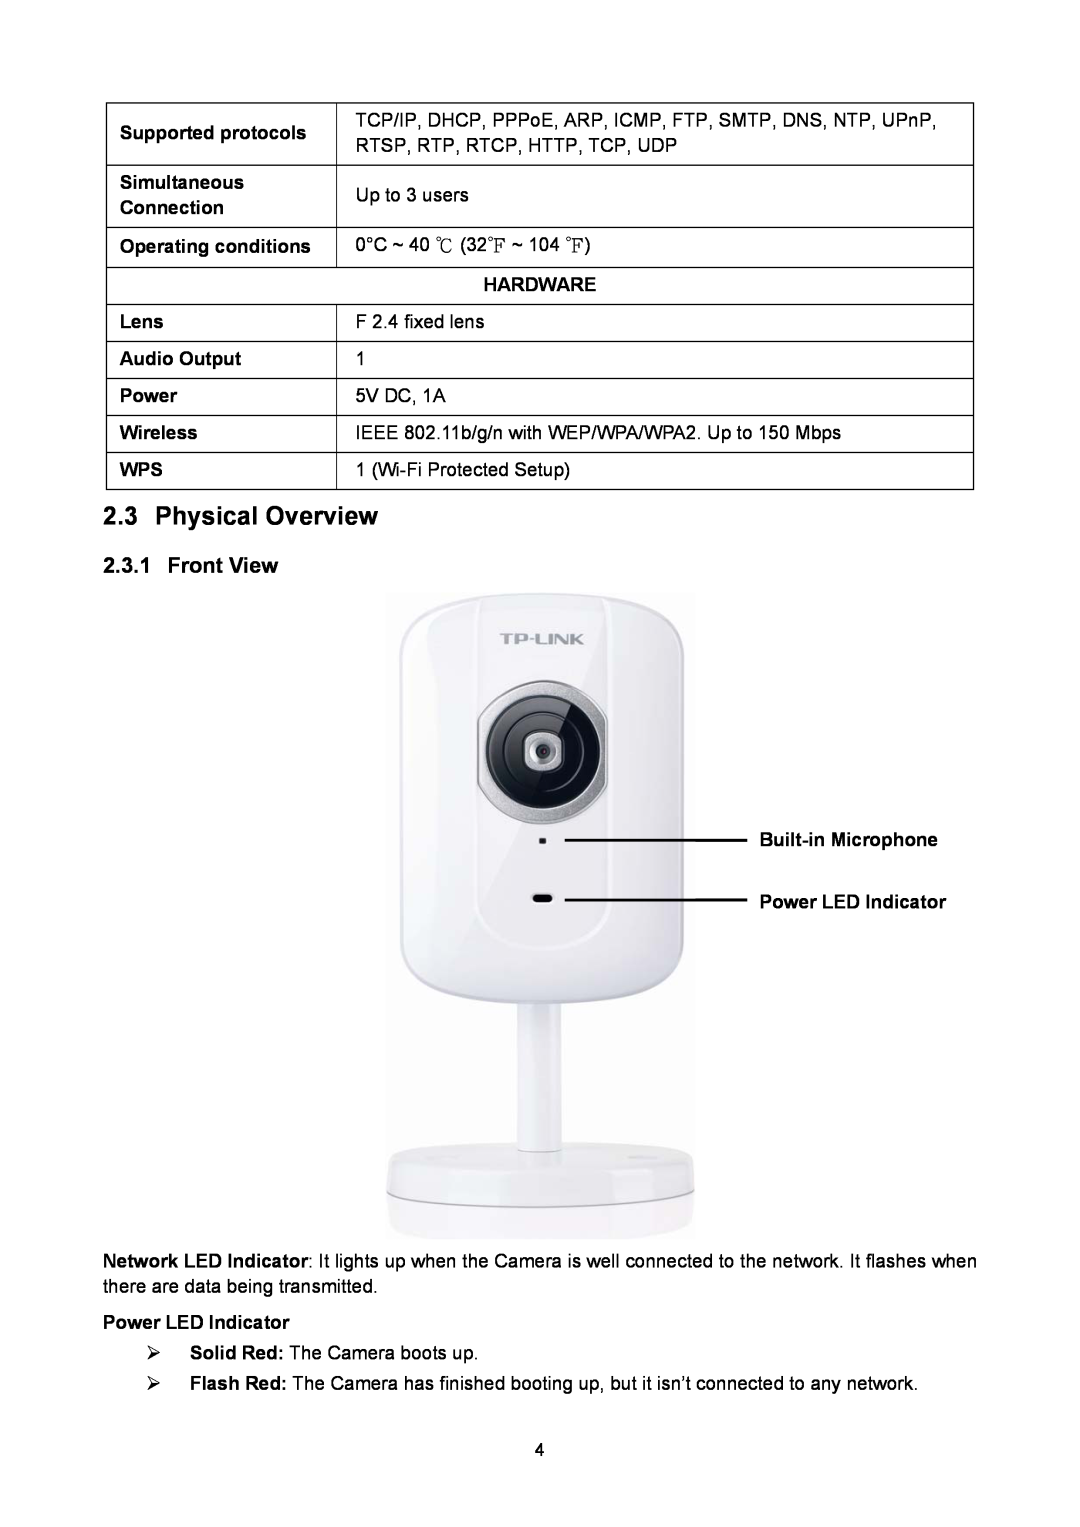 TP-Link TL-SC2020N manual Physical Overview, Front View 